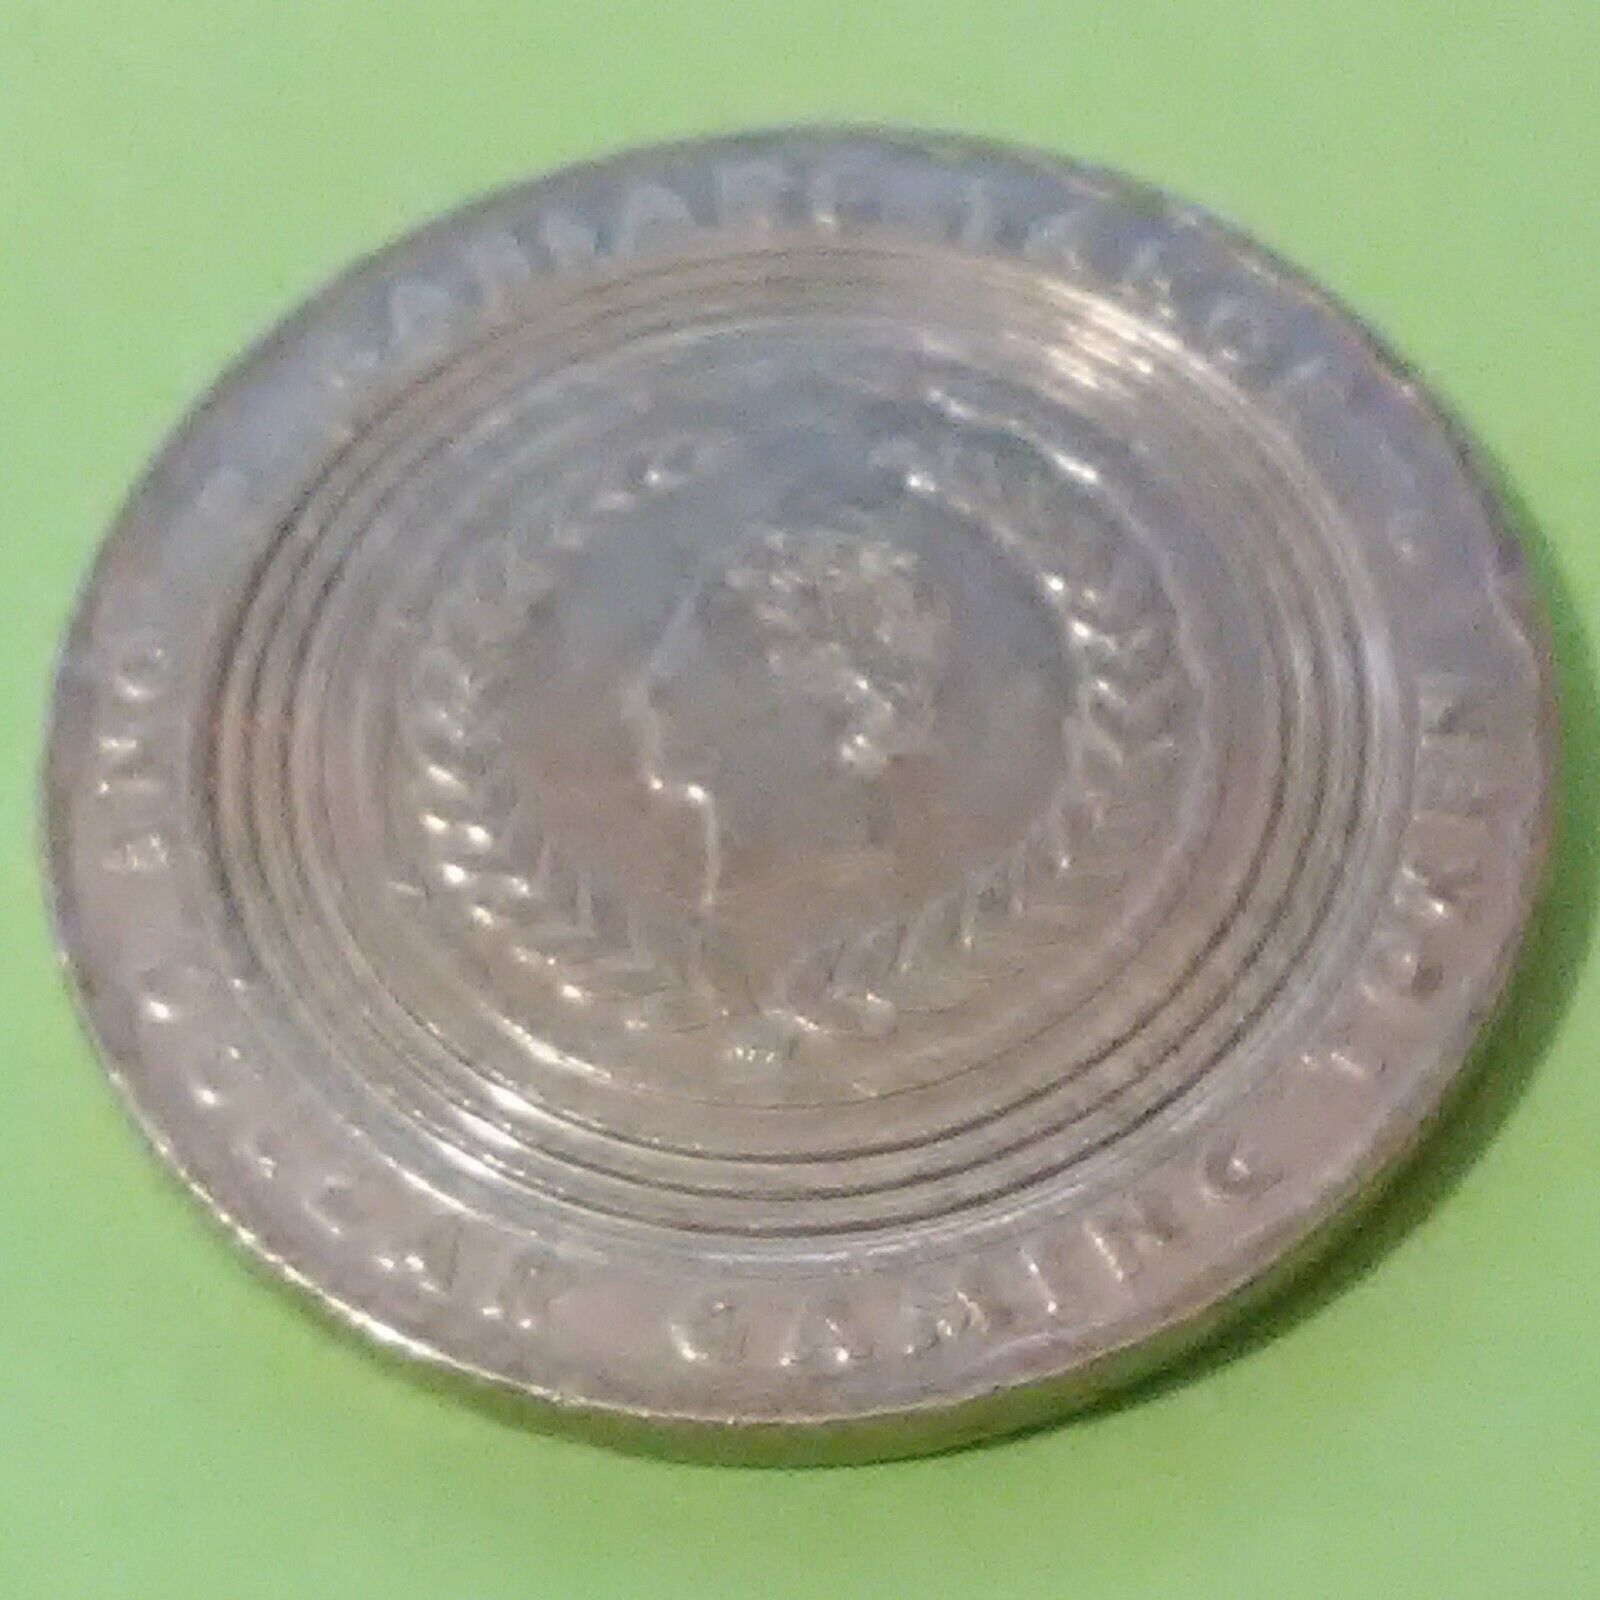 CAESARS CASINO TAHOE, NEVADA $1.00 GAMING TOKEN GREAT FOR ANY COLLECTION